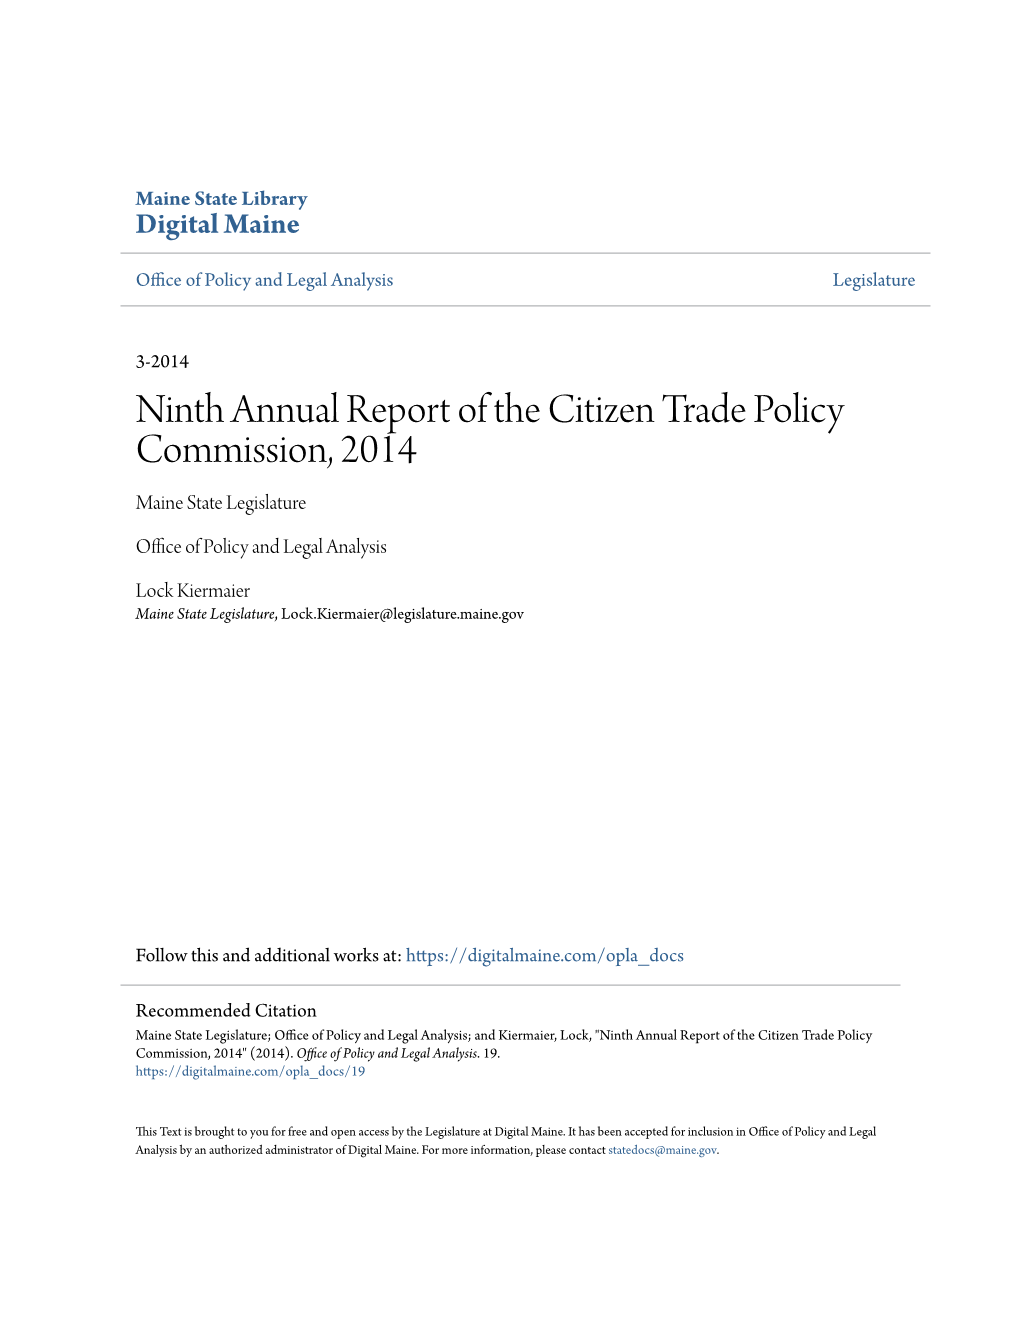 Ninth Annual Report of the Citizen Trade Policy Commission, 2014 Maine State Legislature